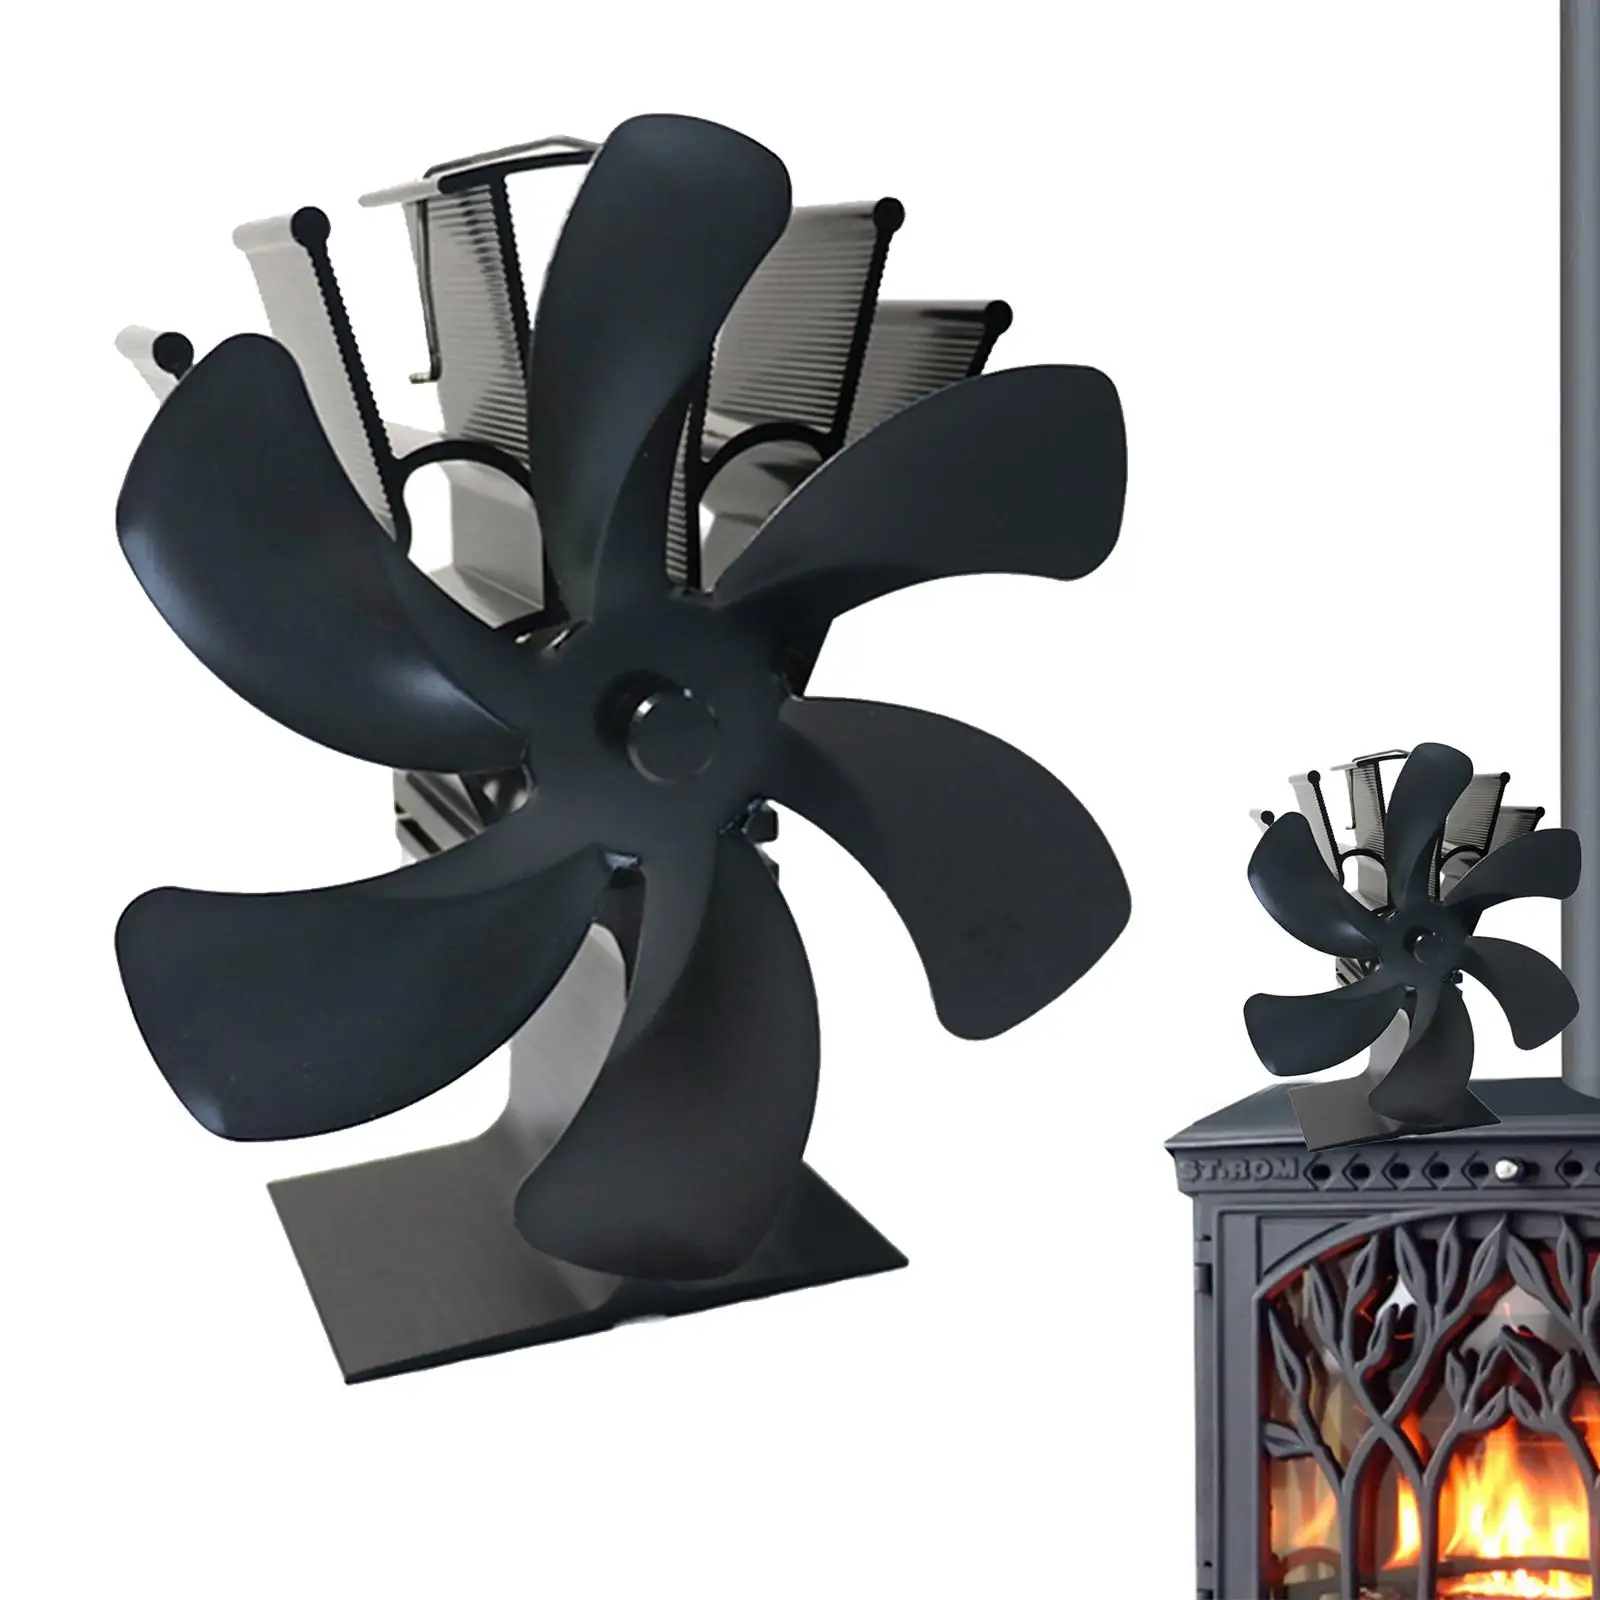 Large 6 Blade Heat Powered    Fireplace  Burning Fan for Efficient Heat Distribution ? Black